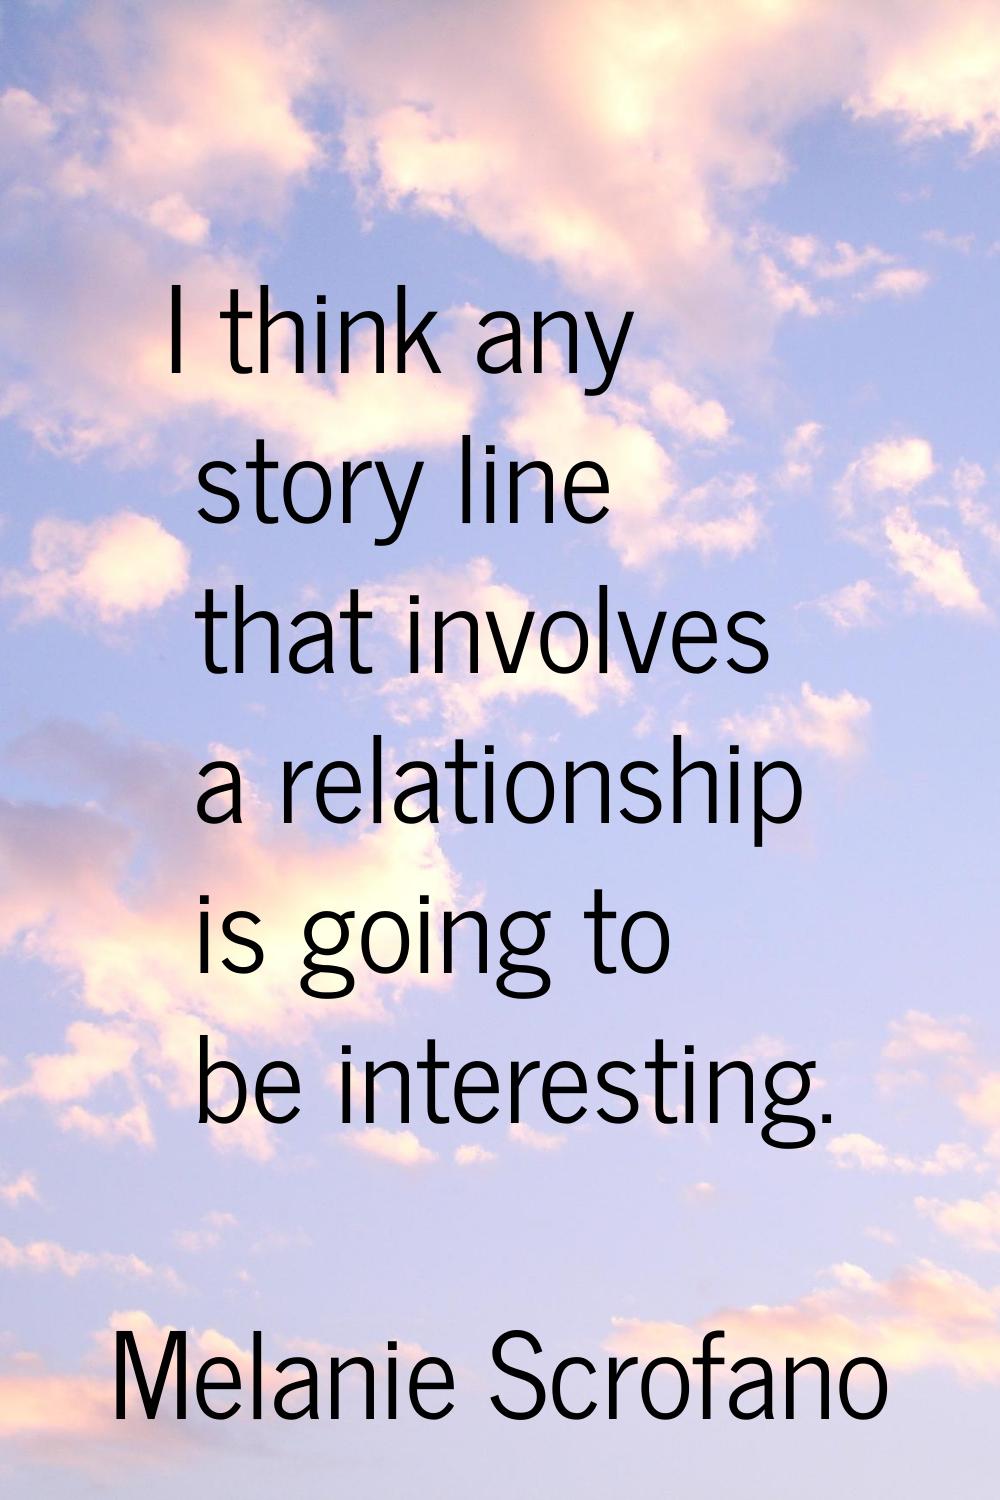 I think any story line that involves a relationship is going to be interesting.